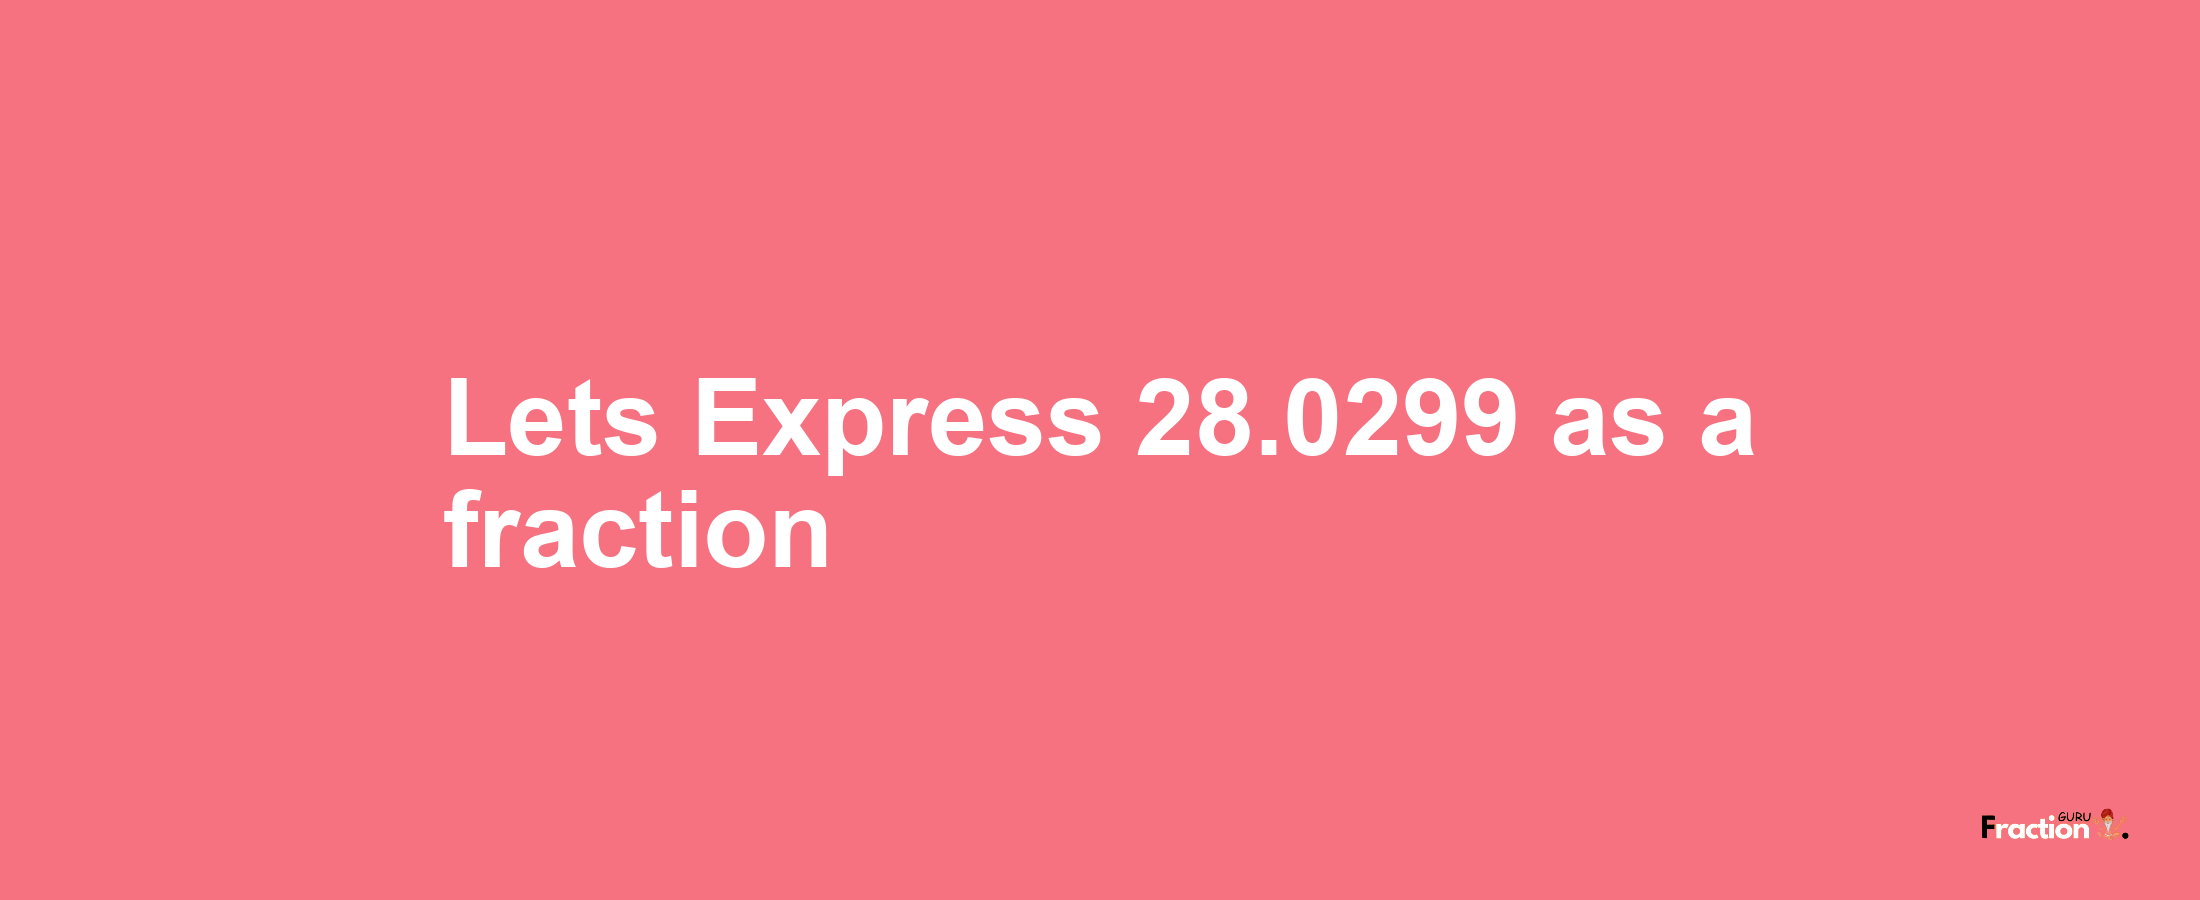 Lets Express 28.0299 as afraction